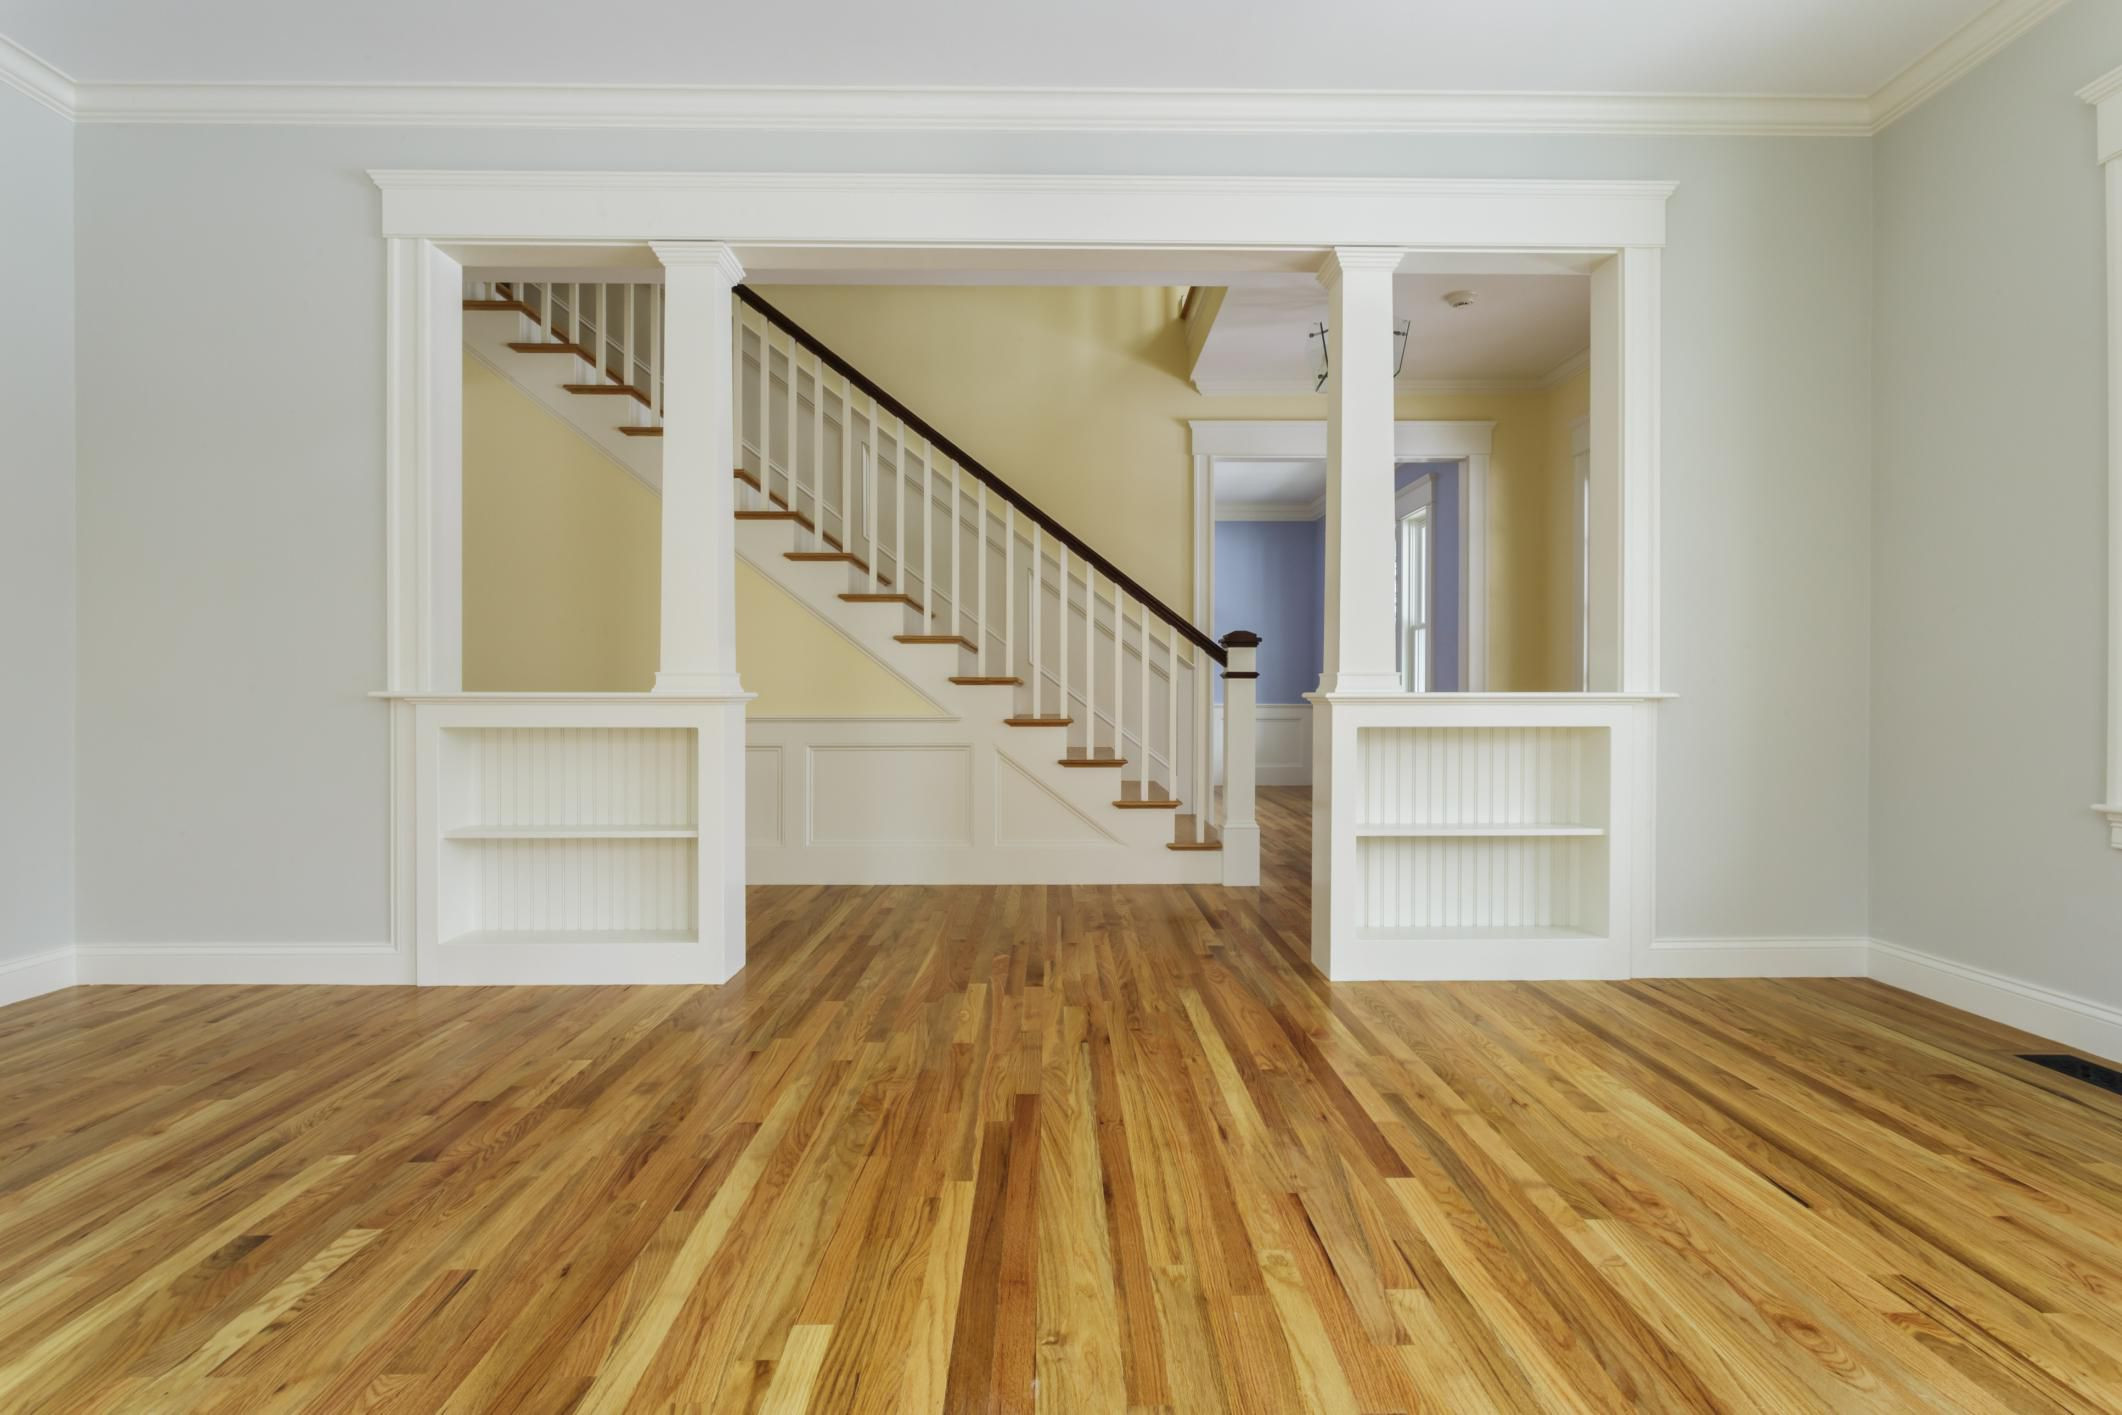 23 Unique How to Install 5 Inch Hardwood Floor 2022 free download how to install 5 inch hardwood floor of guide to solid hardwood floors within 168686571 56a49f213df78cf772834e24